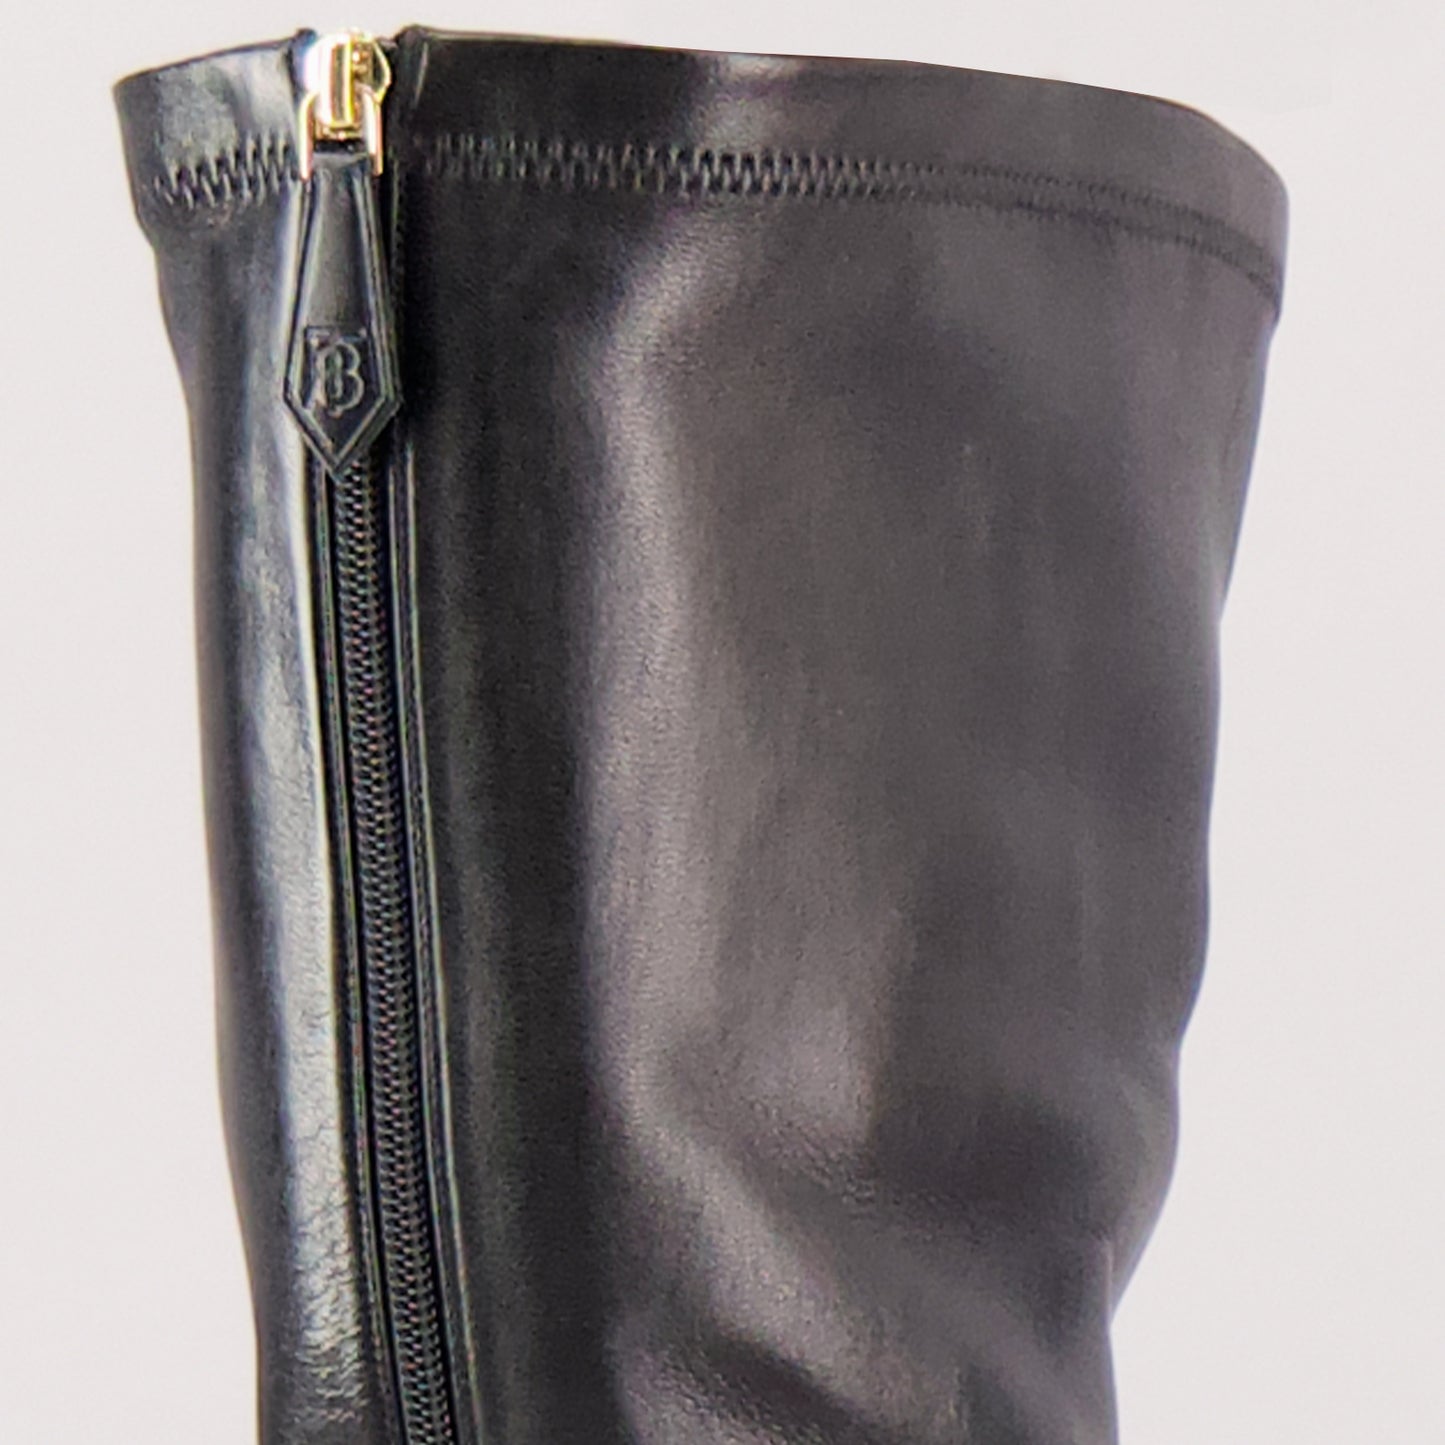 Leather thigh high boots